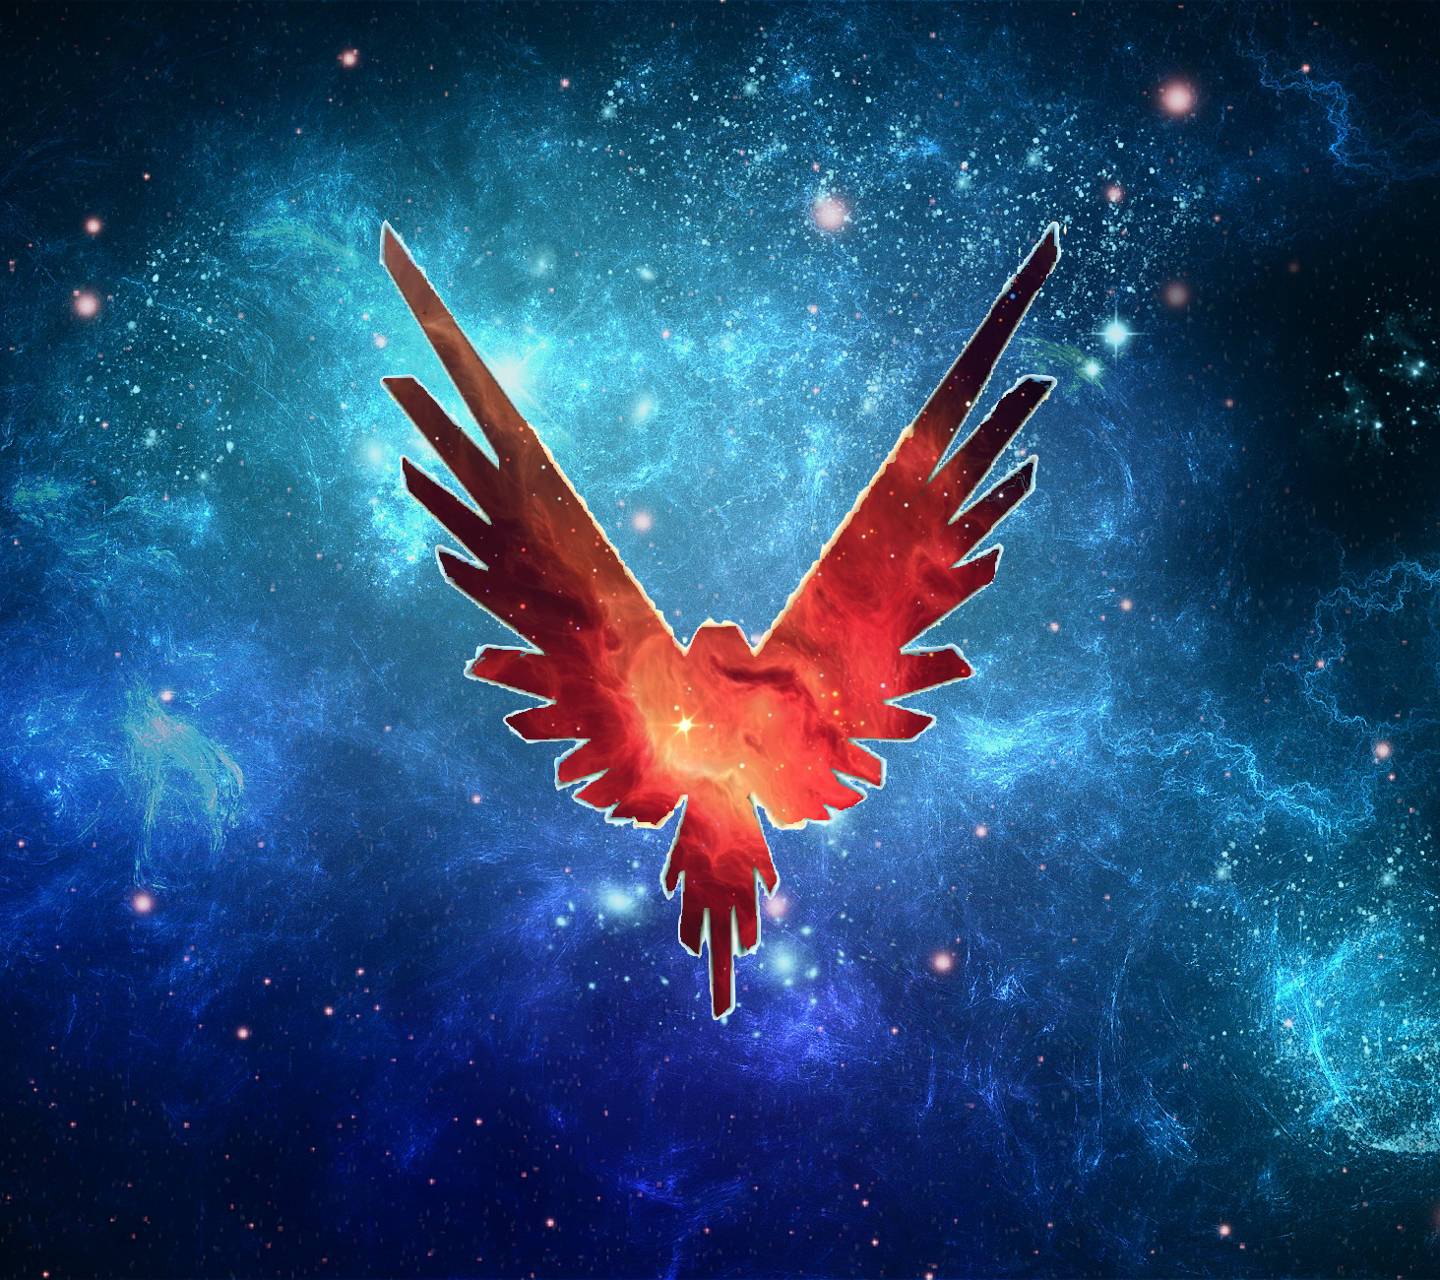 Download free maverick by logan paul wallpaper for your mobile